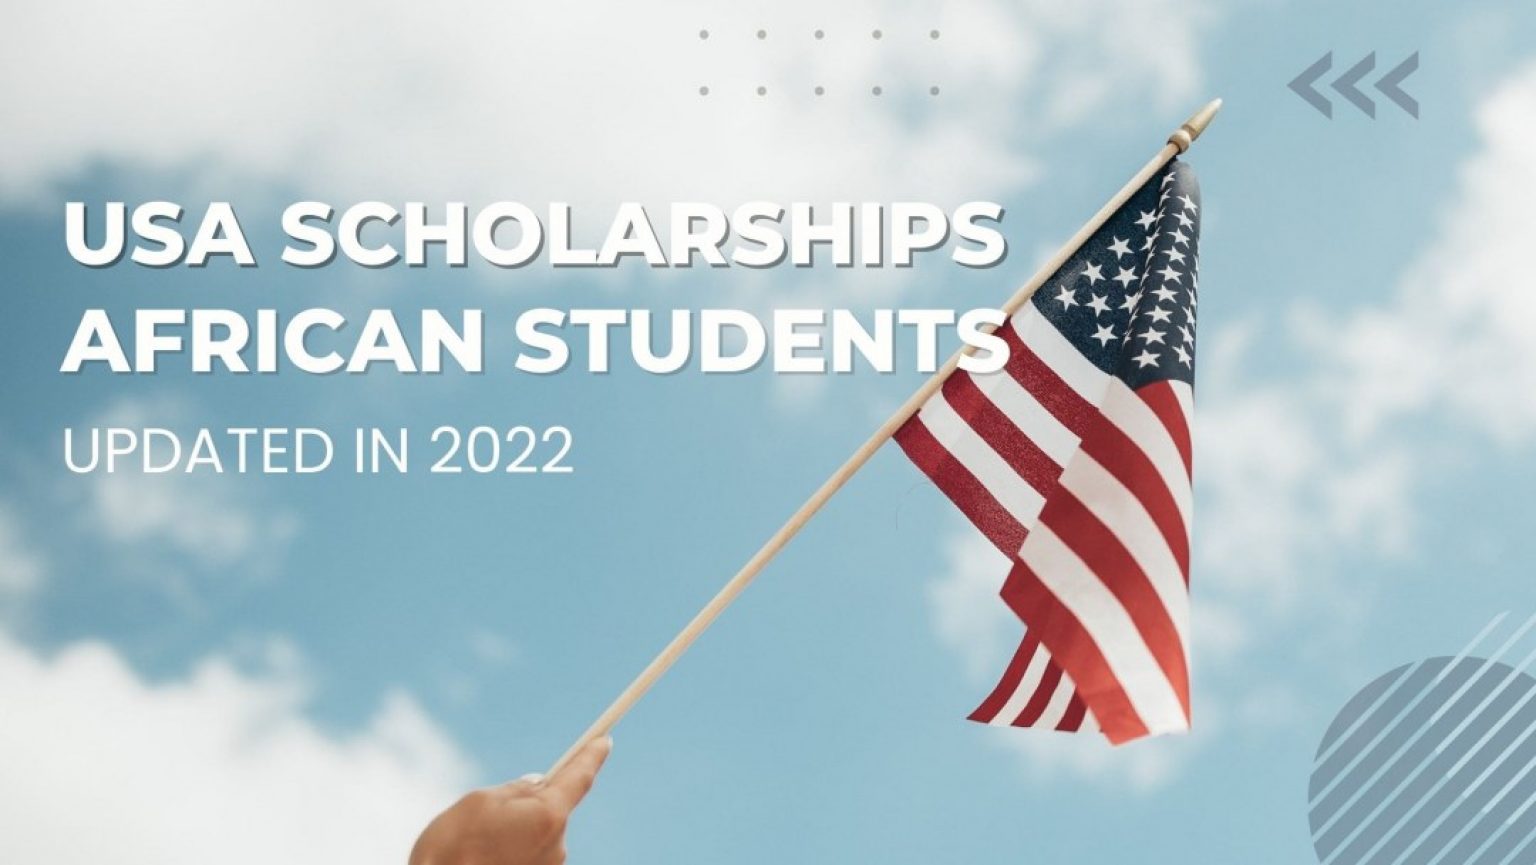 USA Scholarships For African Students To A Brighter Future